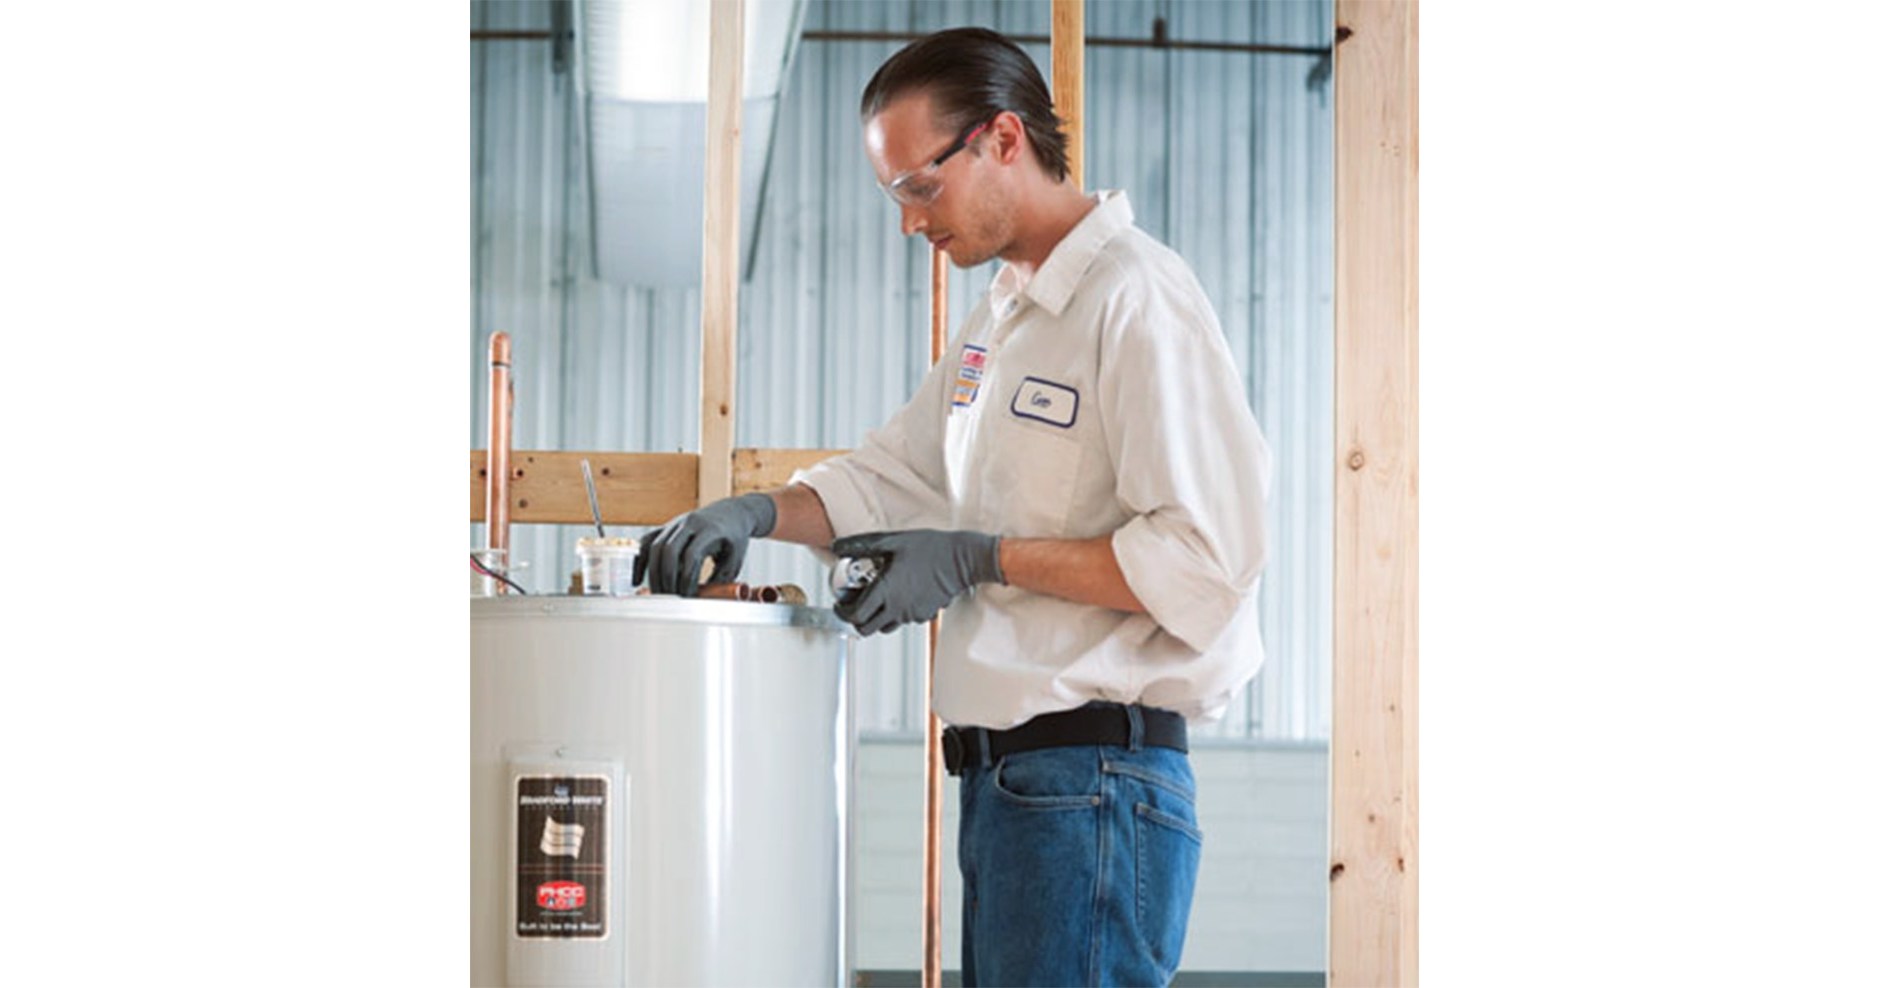 Replace or repair? How homeowners can choose the right solution for their water heater